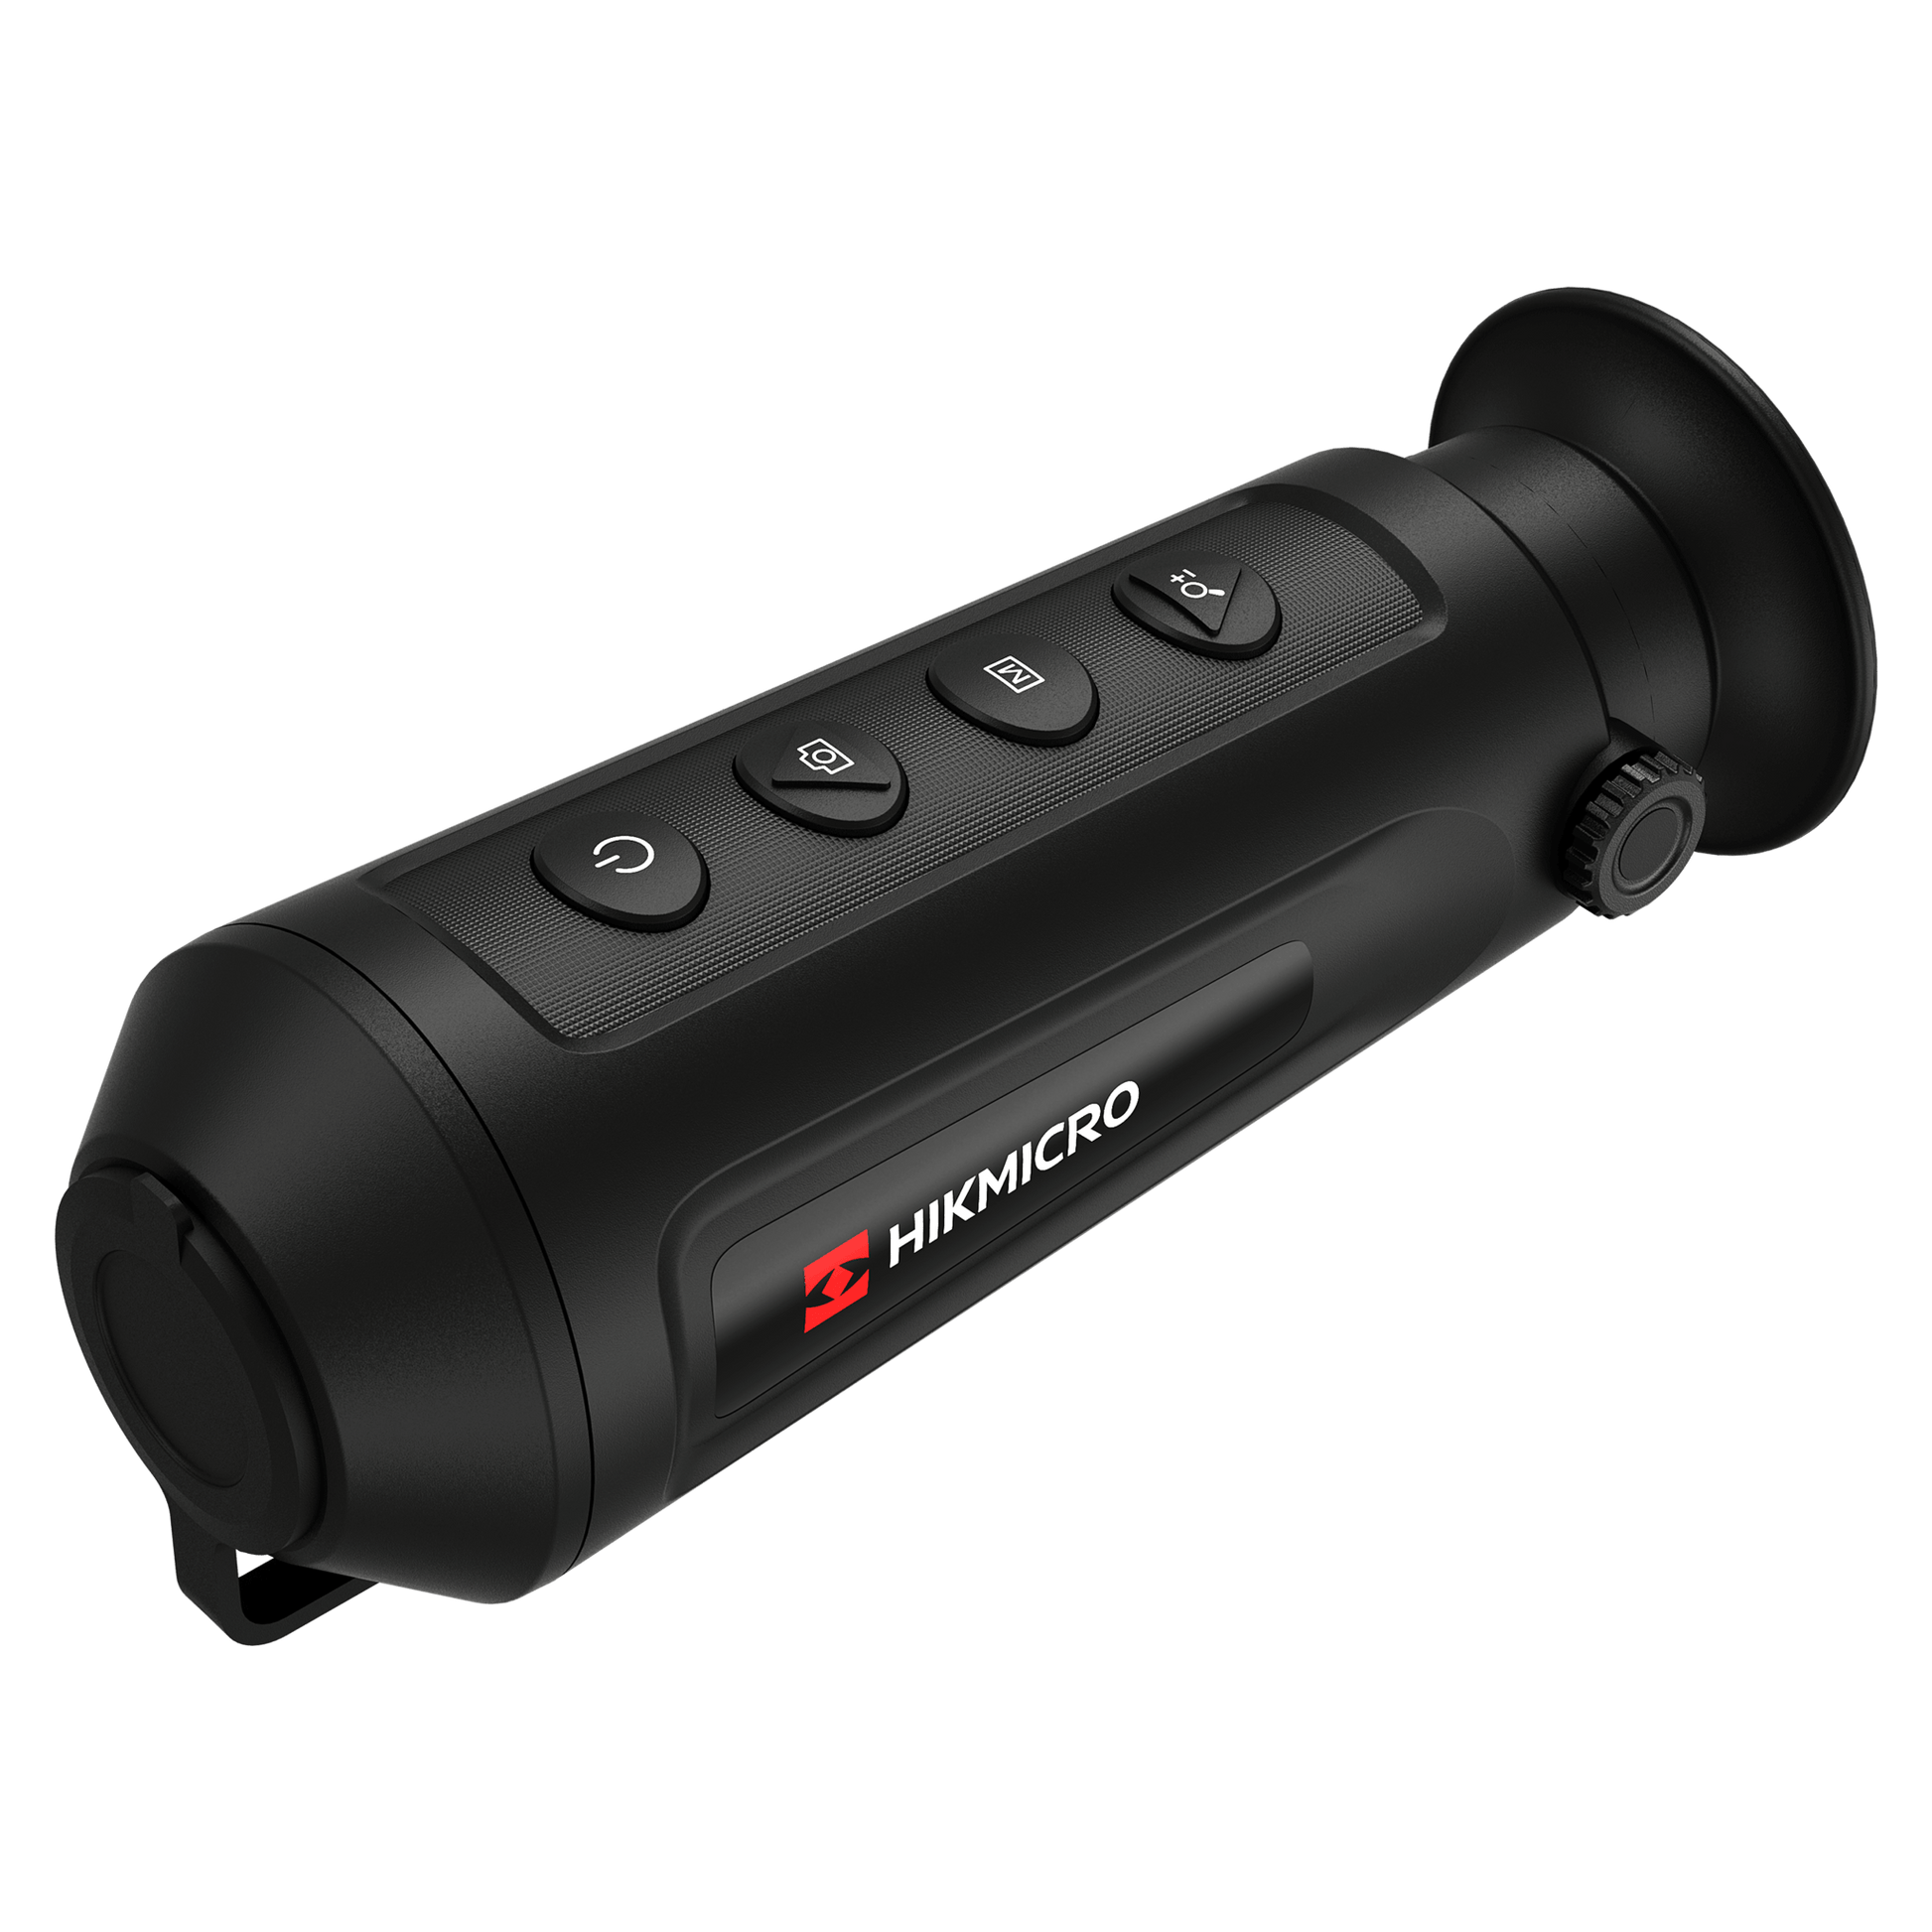 Cape Thermal - The best thermal imaging monoculars for sale - HikMicro LYNX LC06 Handheld thermal imaging monocular - Right Side View with lens cap